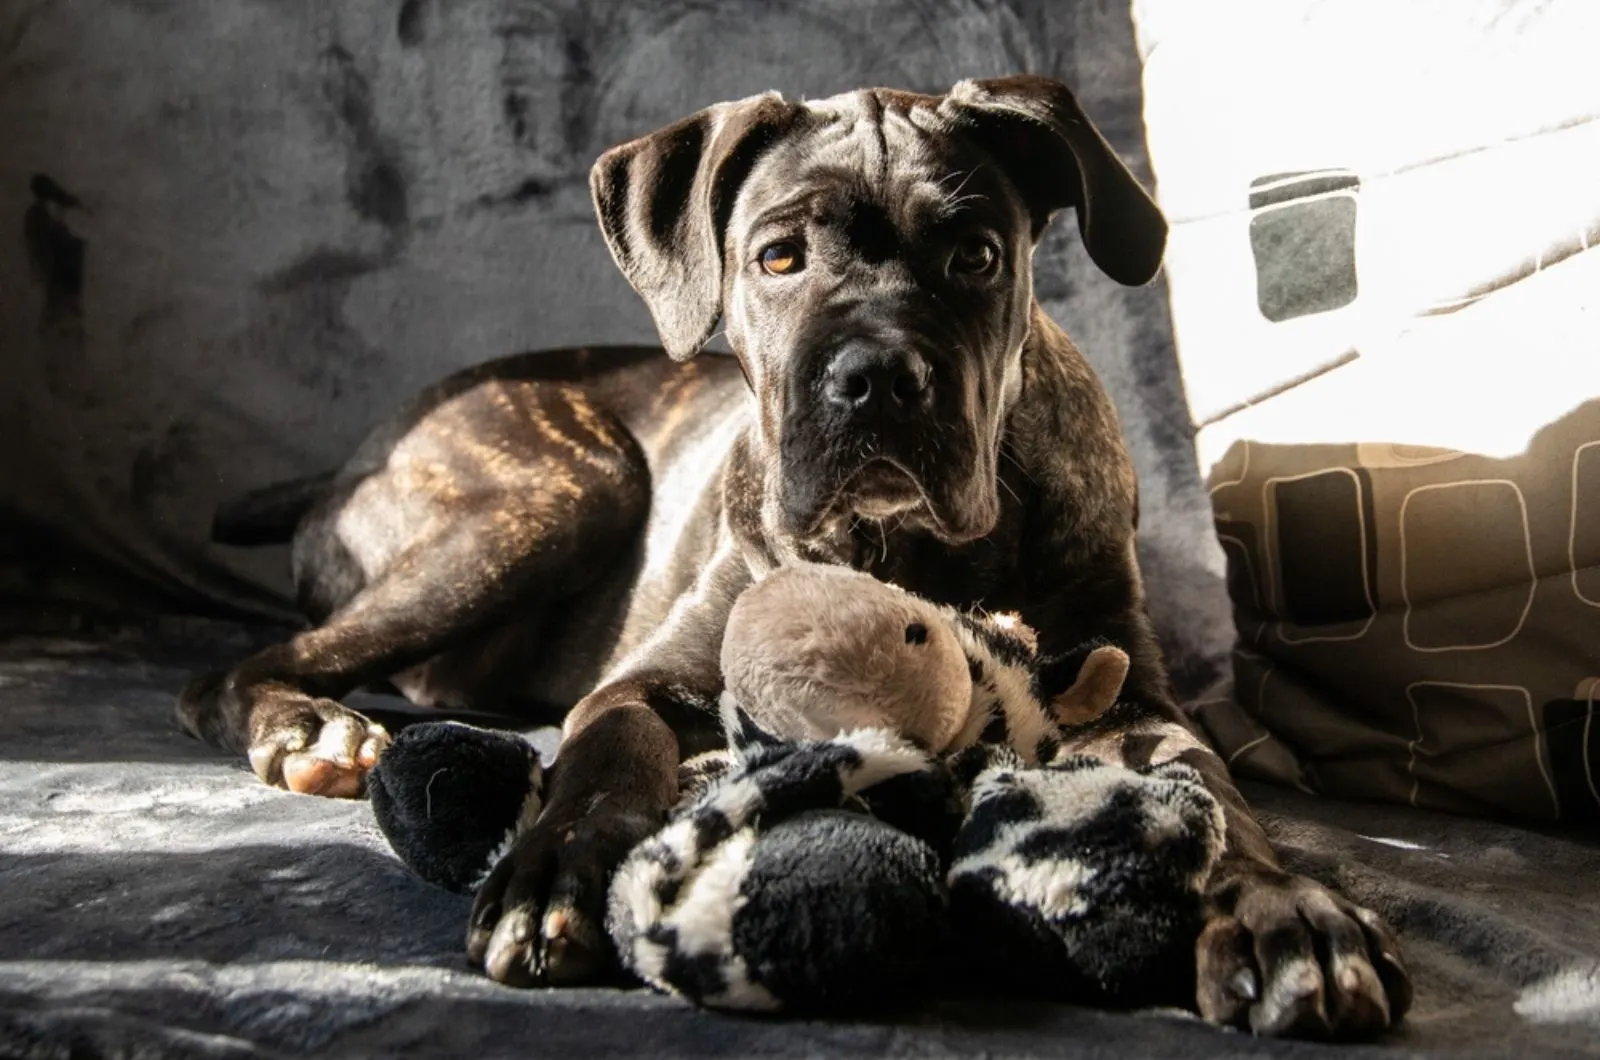 cane corso puppy playing with his toy at home